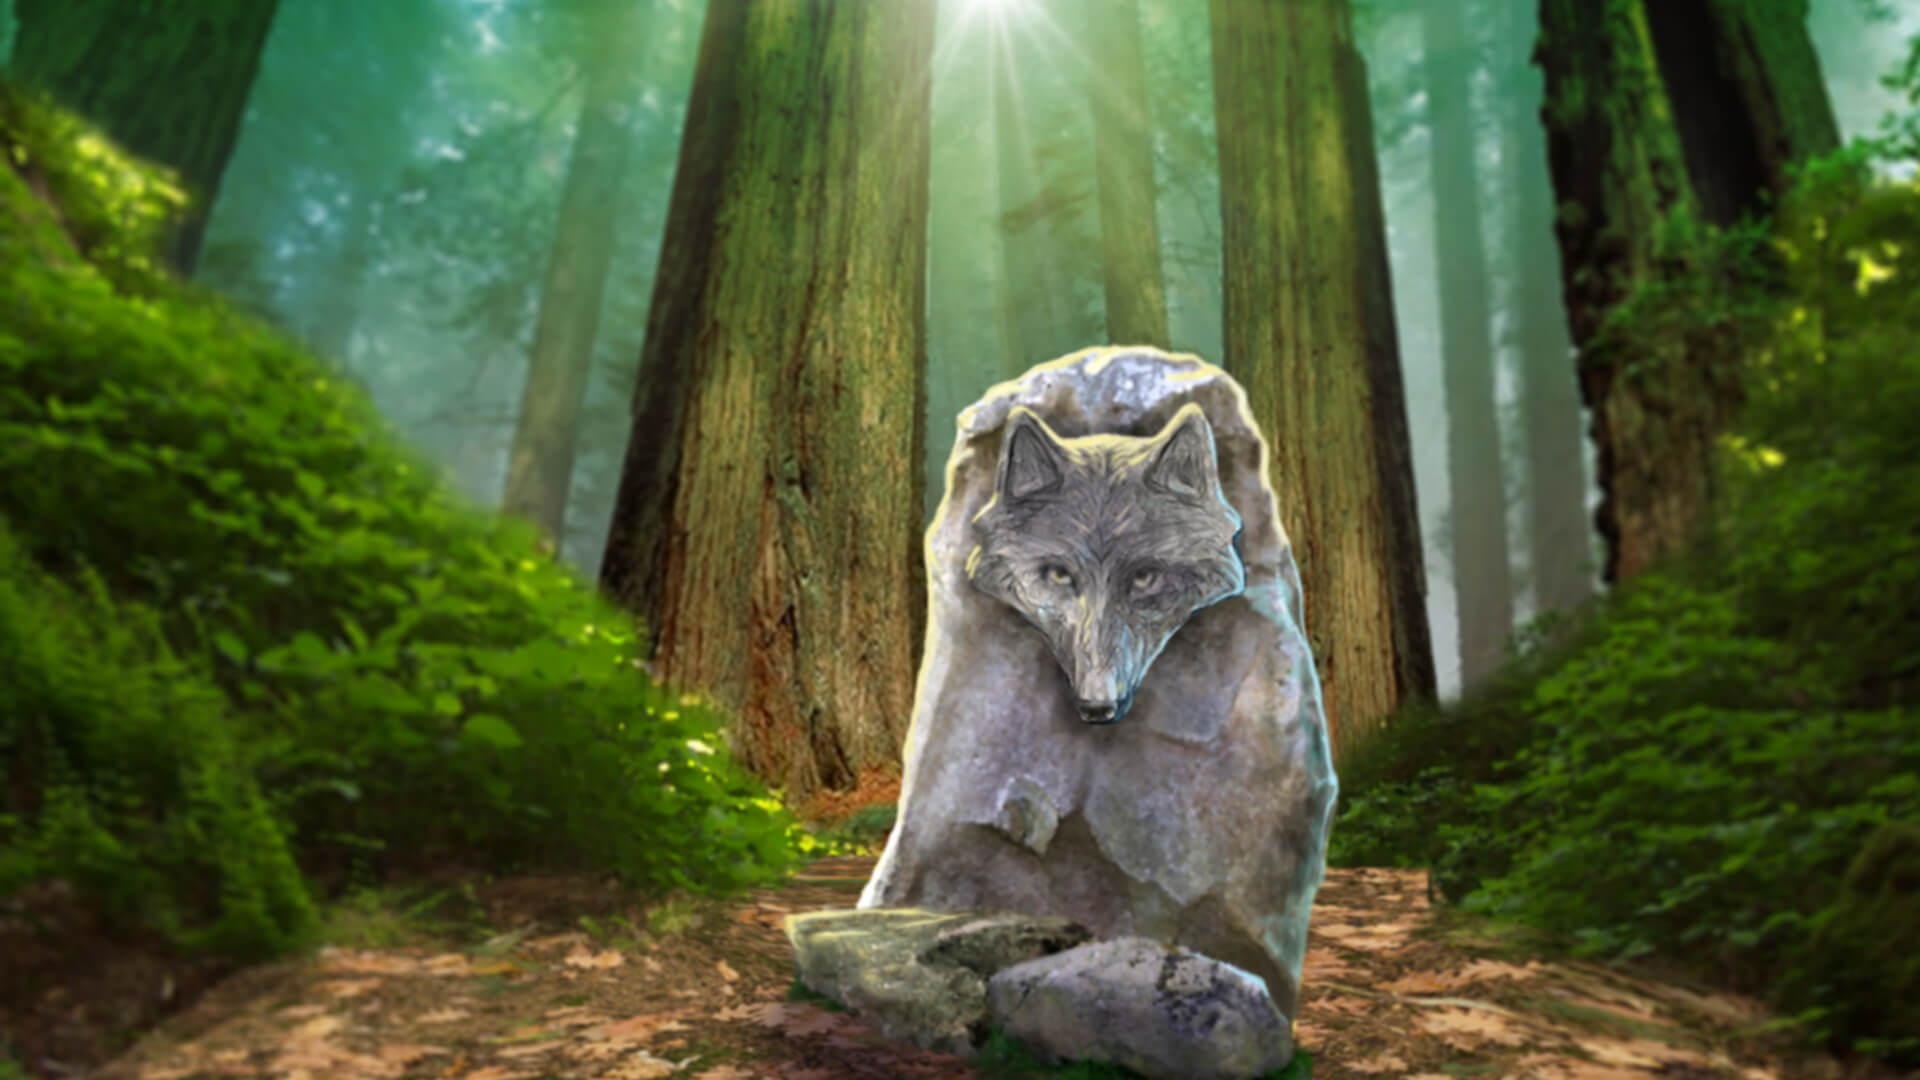 Game hight resolution background Wolfheart